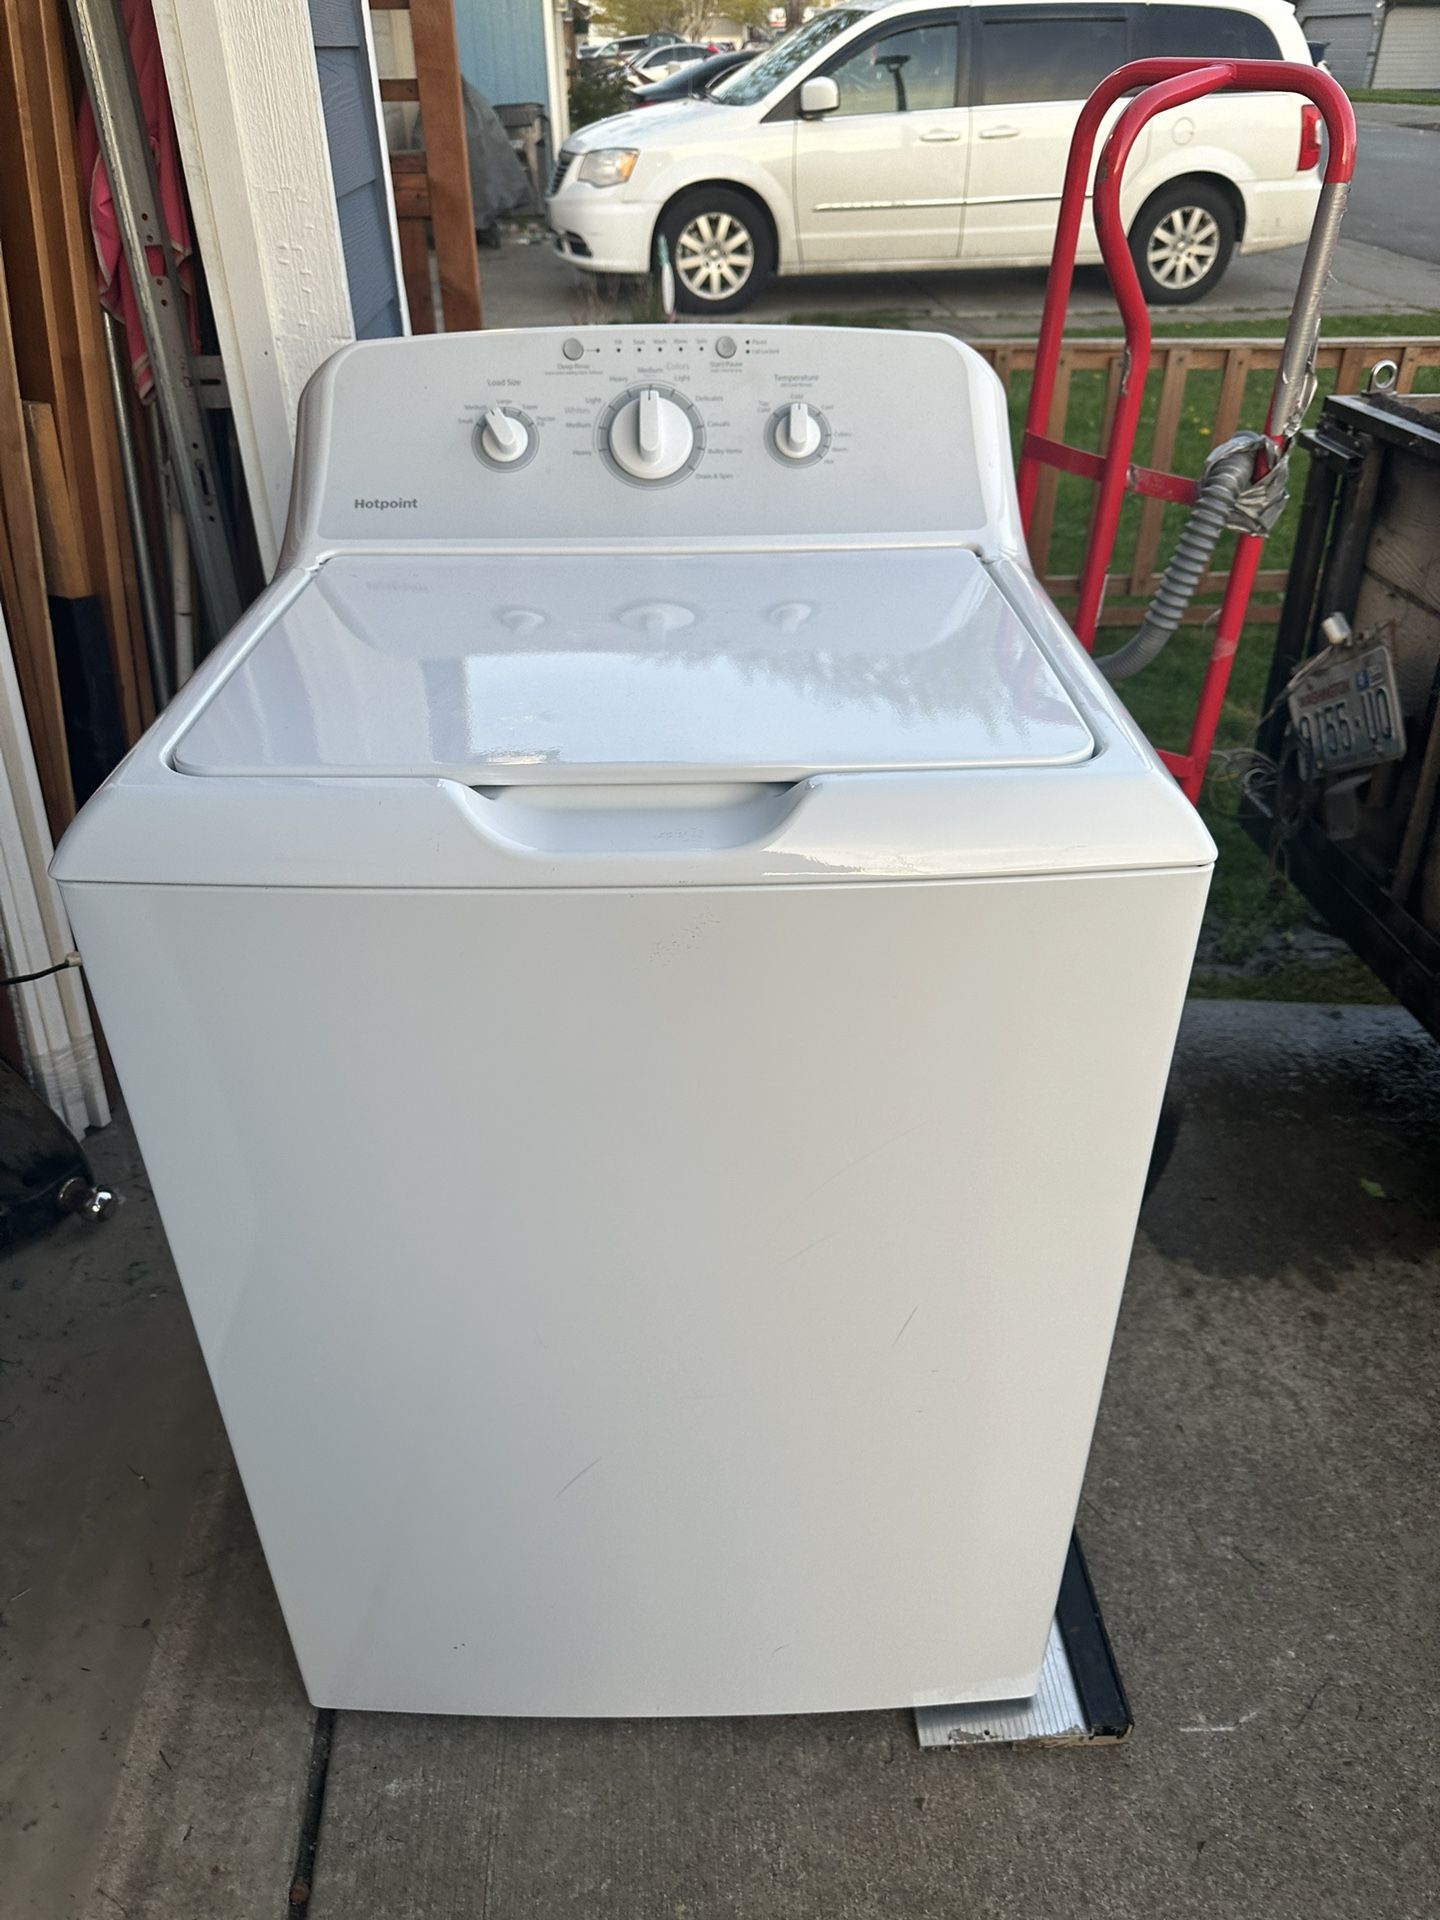 Washer Hot point Electric  & A Samsung Gas Dryer 